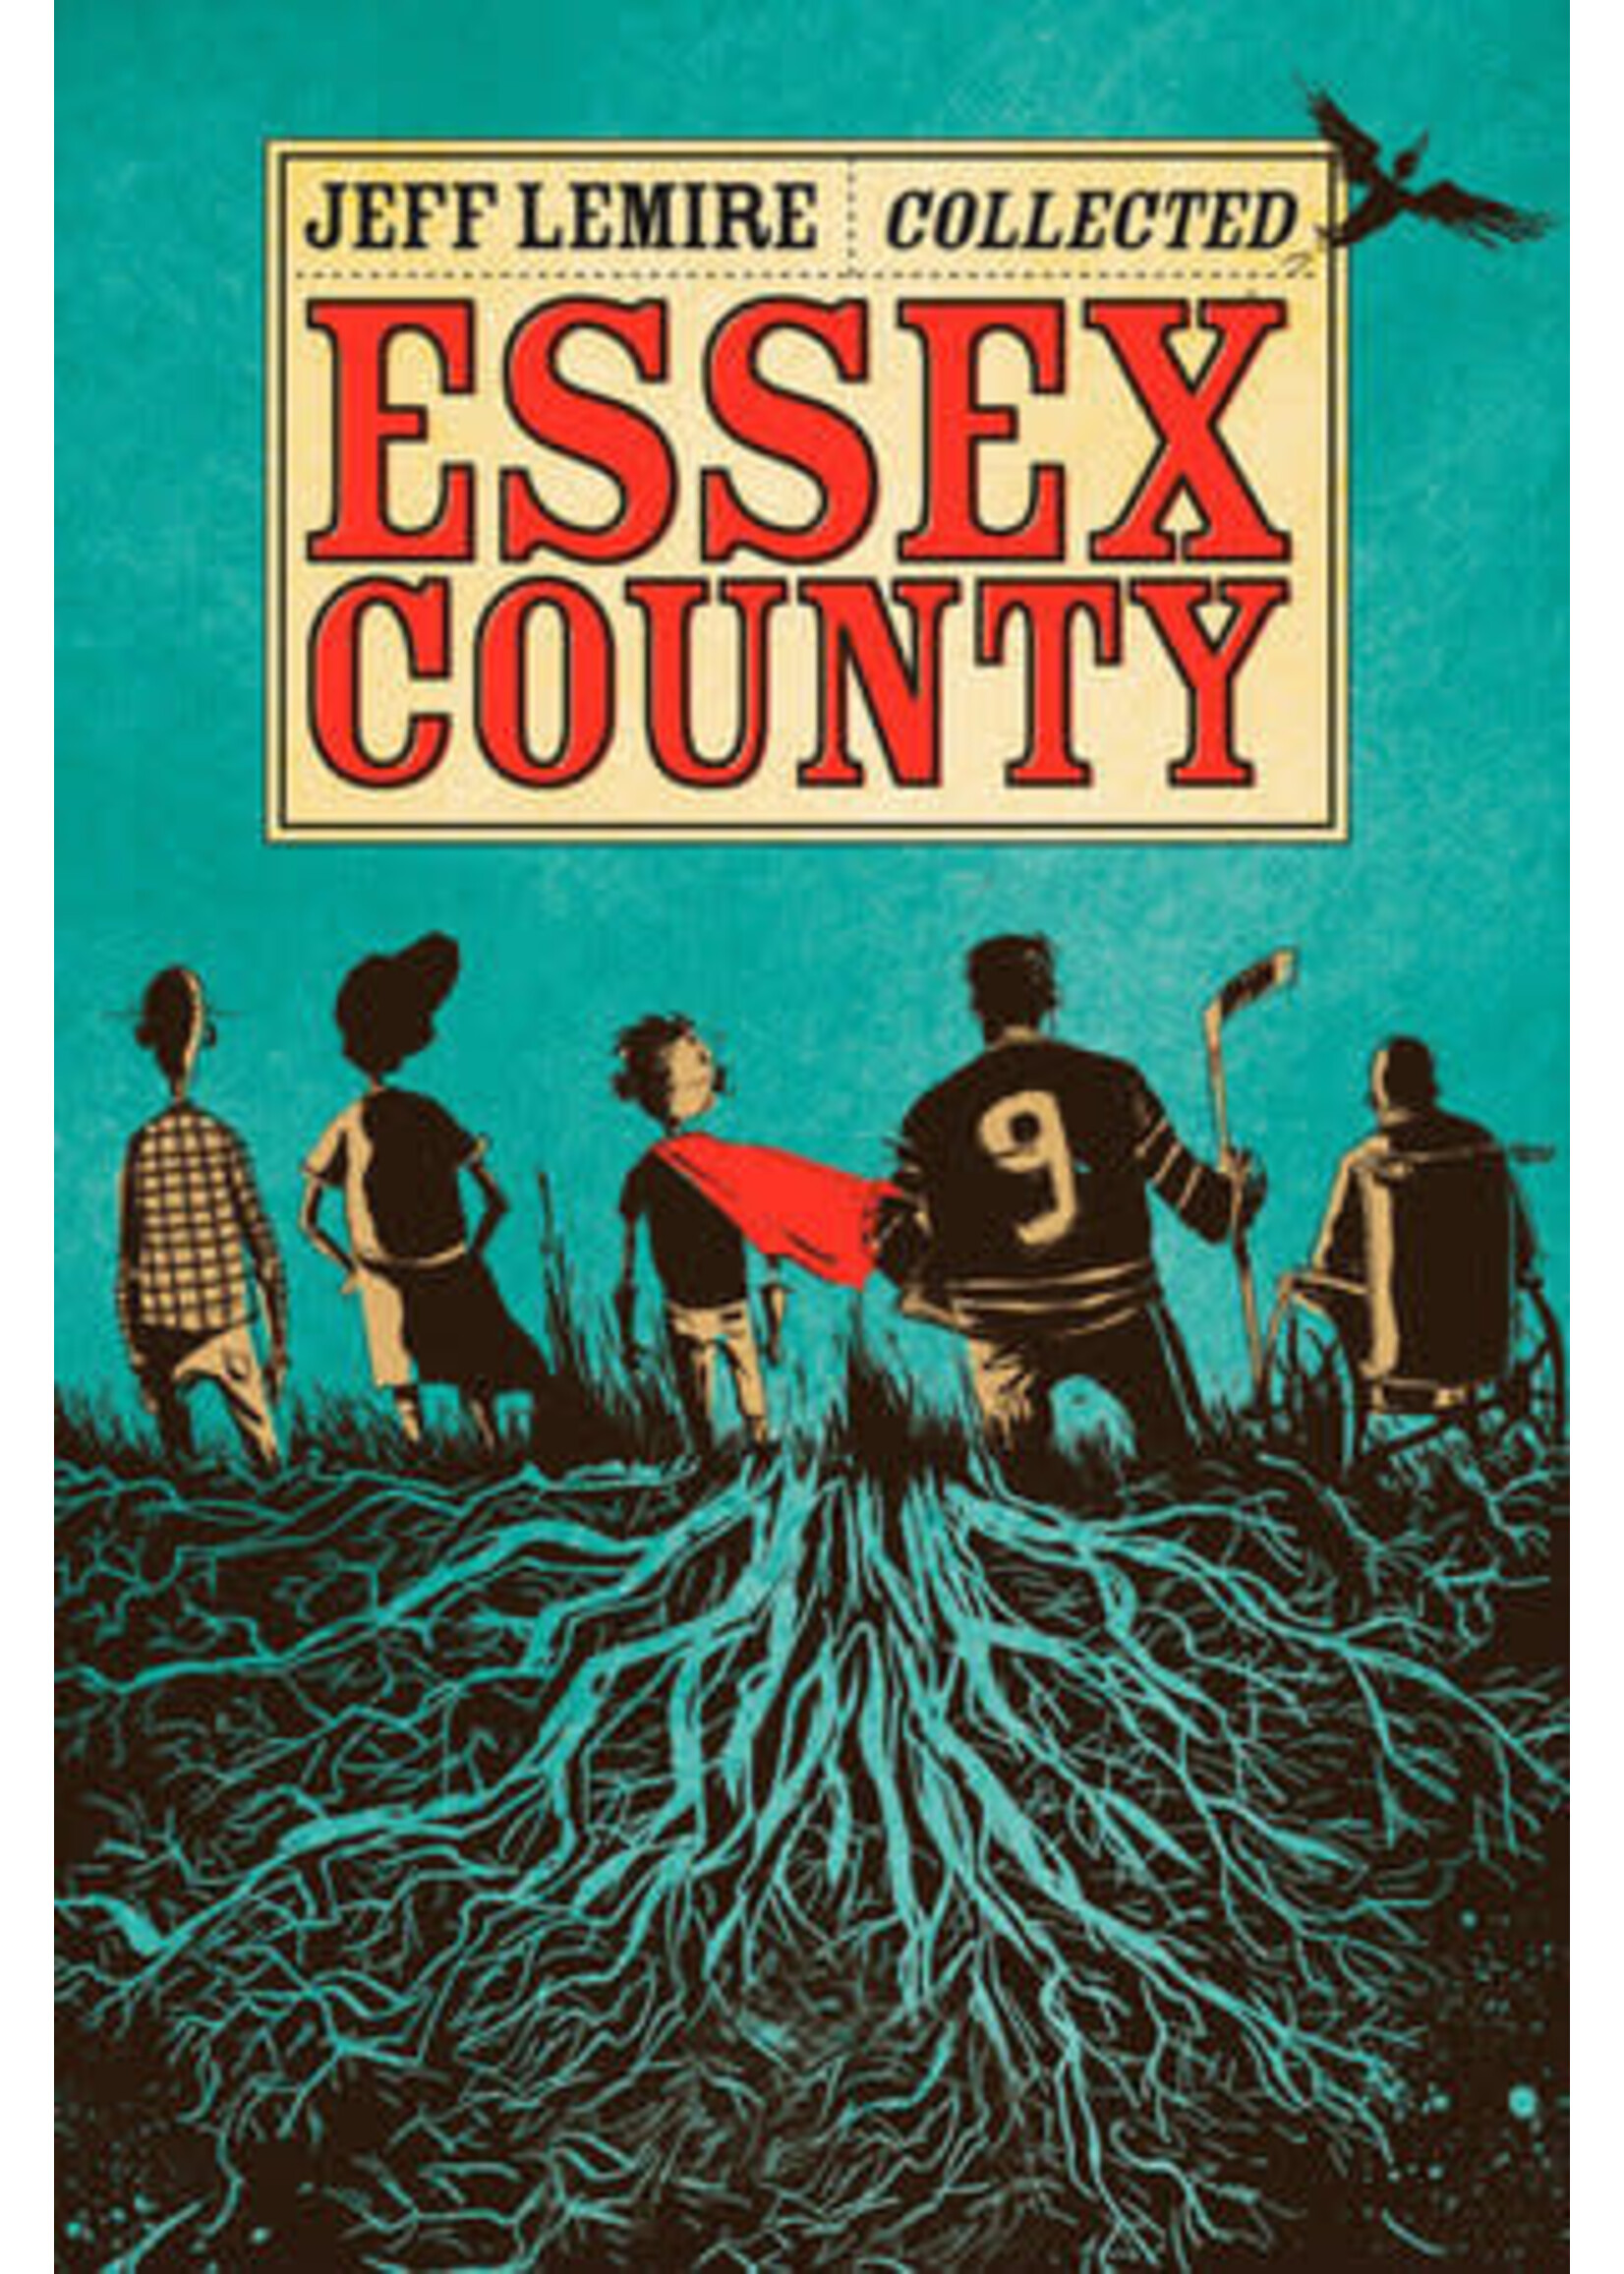 IDW PUBLISHING COLLECTED ESSEX COUNTY